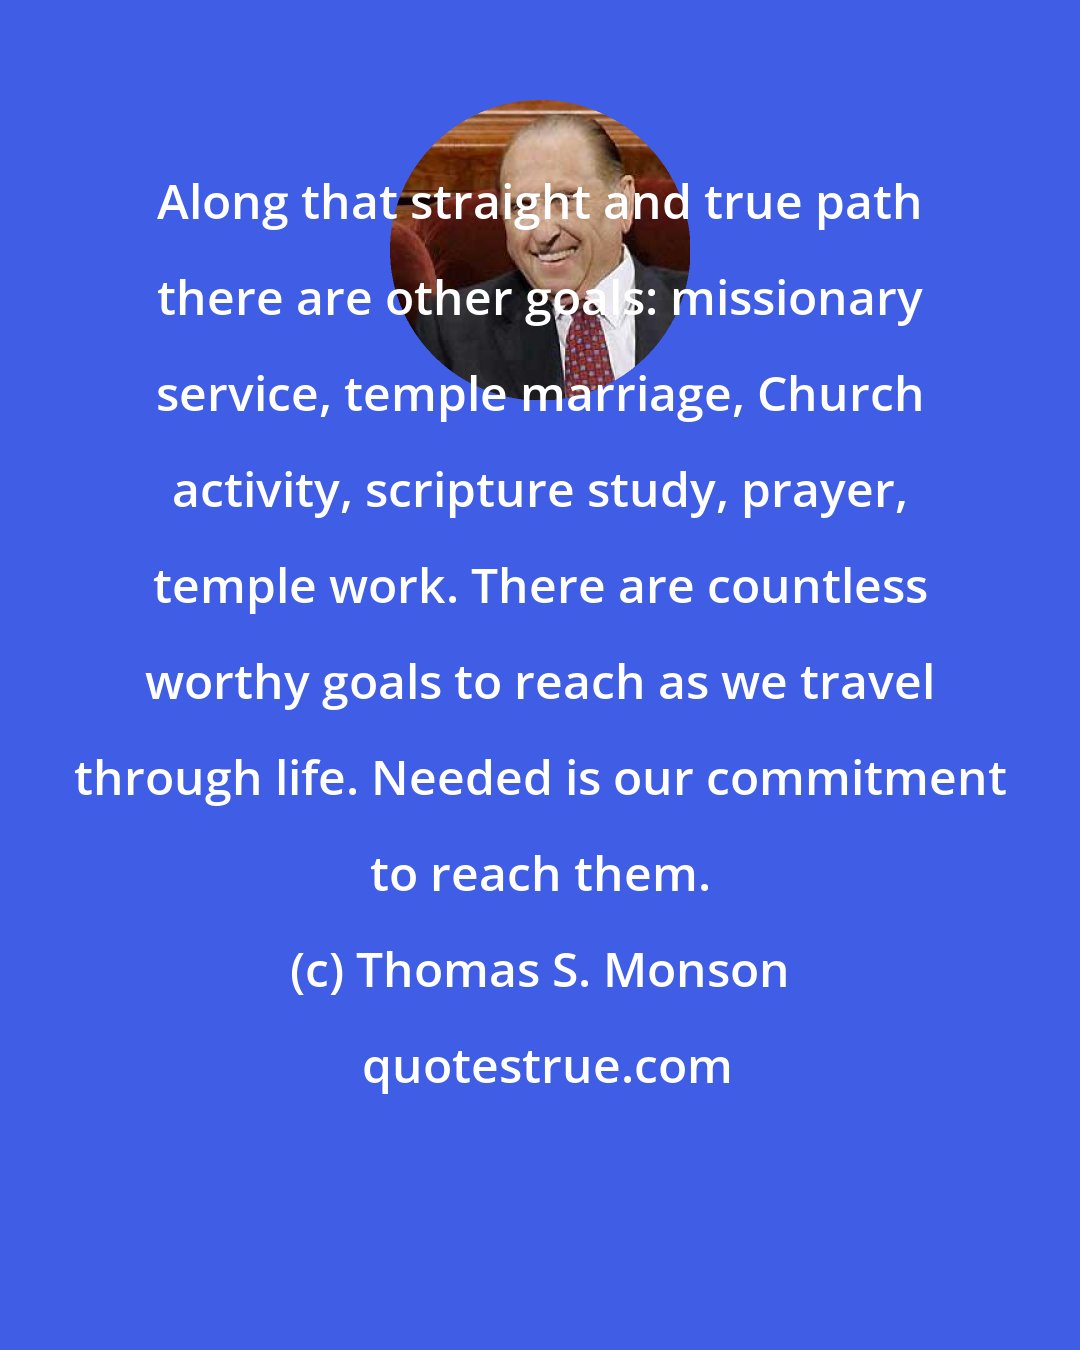 Thomas S. Monson: Along that straight and true path there are other goals: missionary service, temple marriage, Church activity, scripture study, prayer, temple work. There are countless worthy goals to reach as we travel through life. Needed is our commitment to reach them.